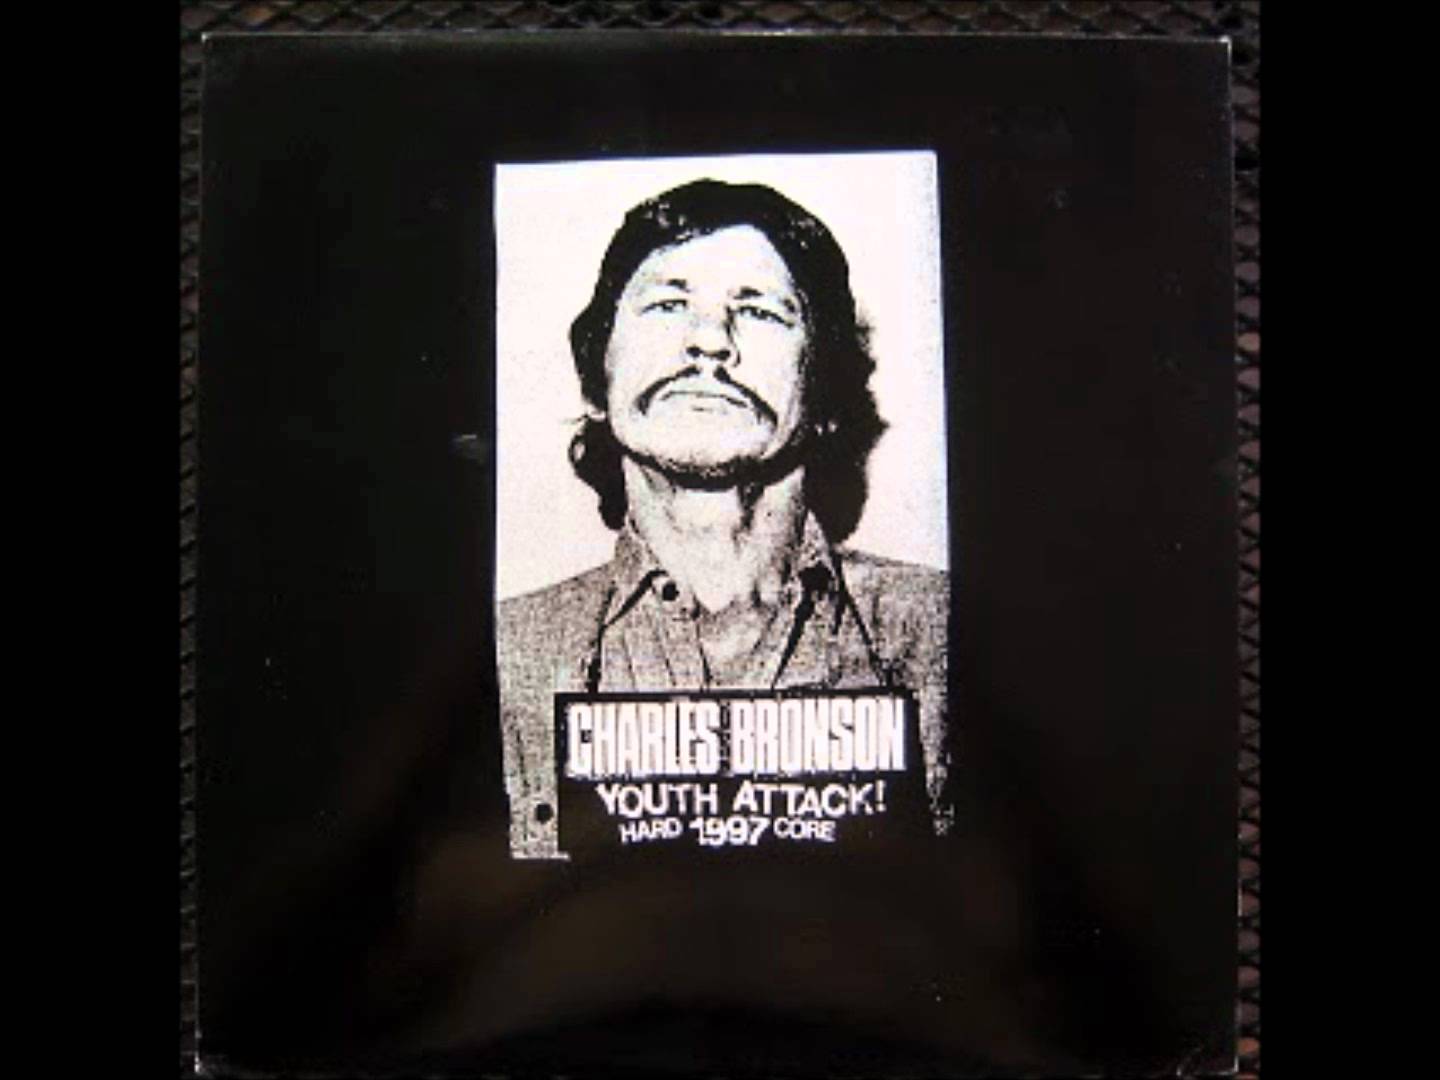 Charles Bronson "Youth Attack!" LP